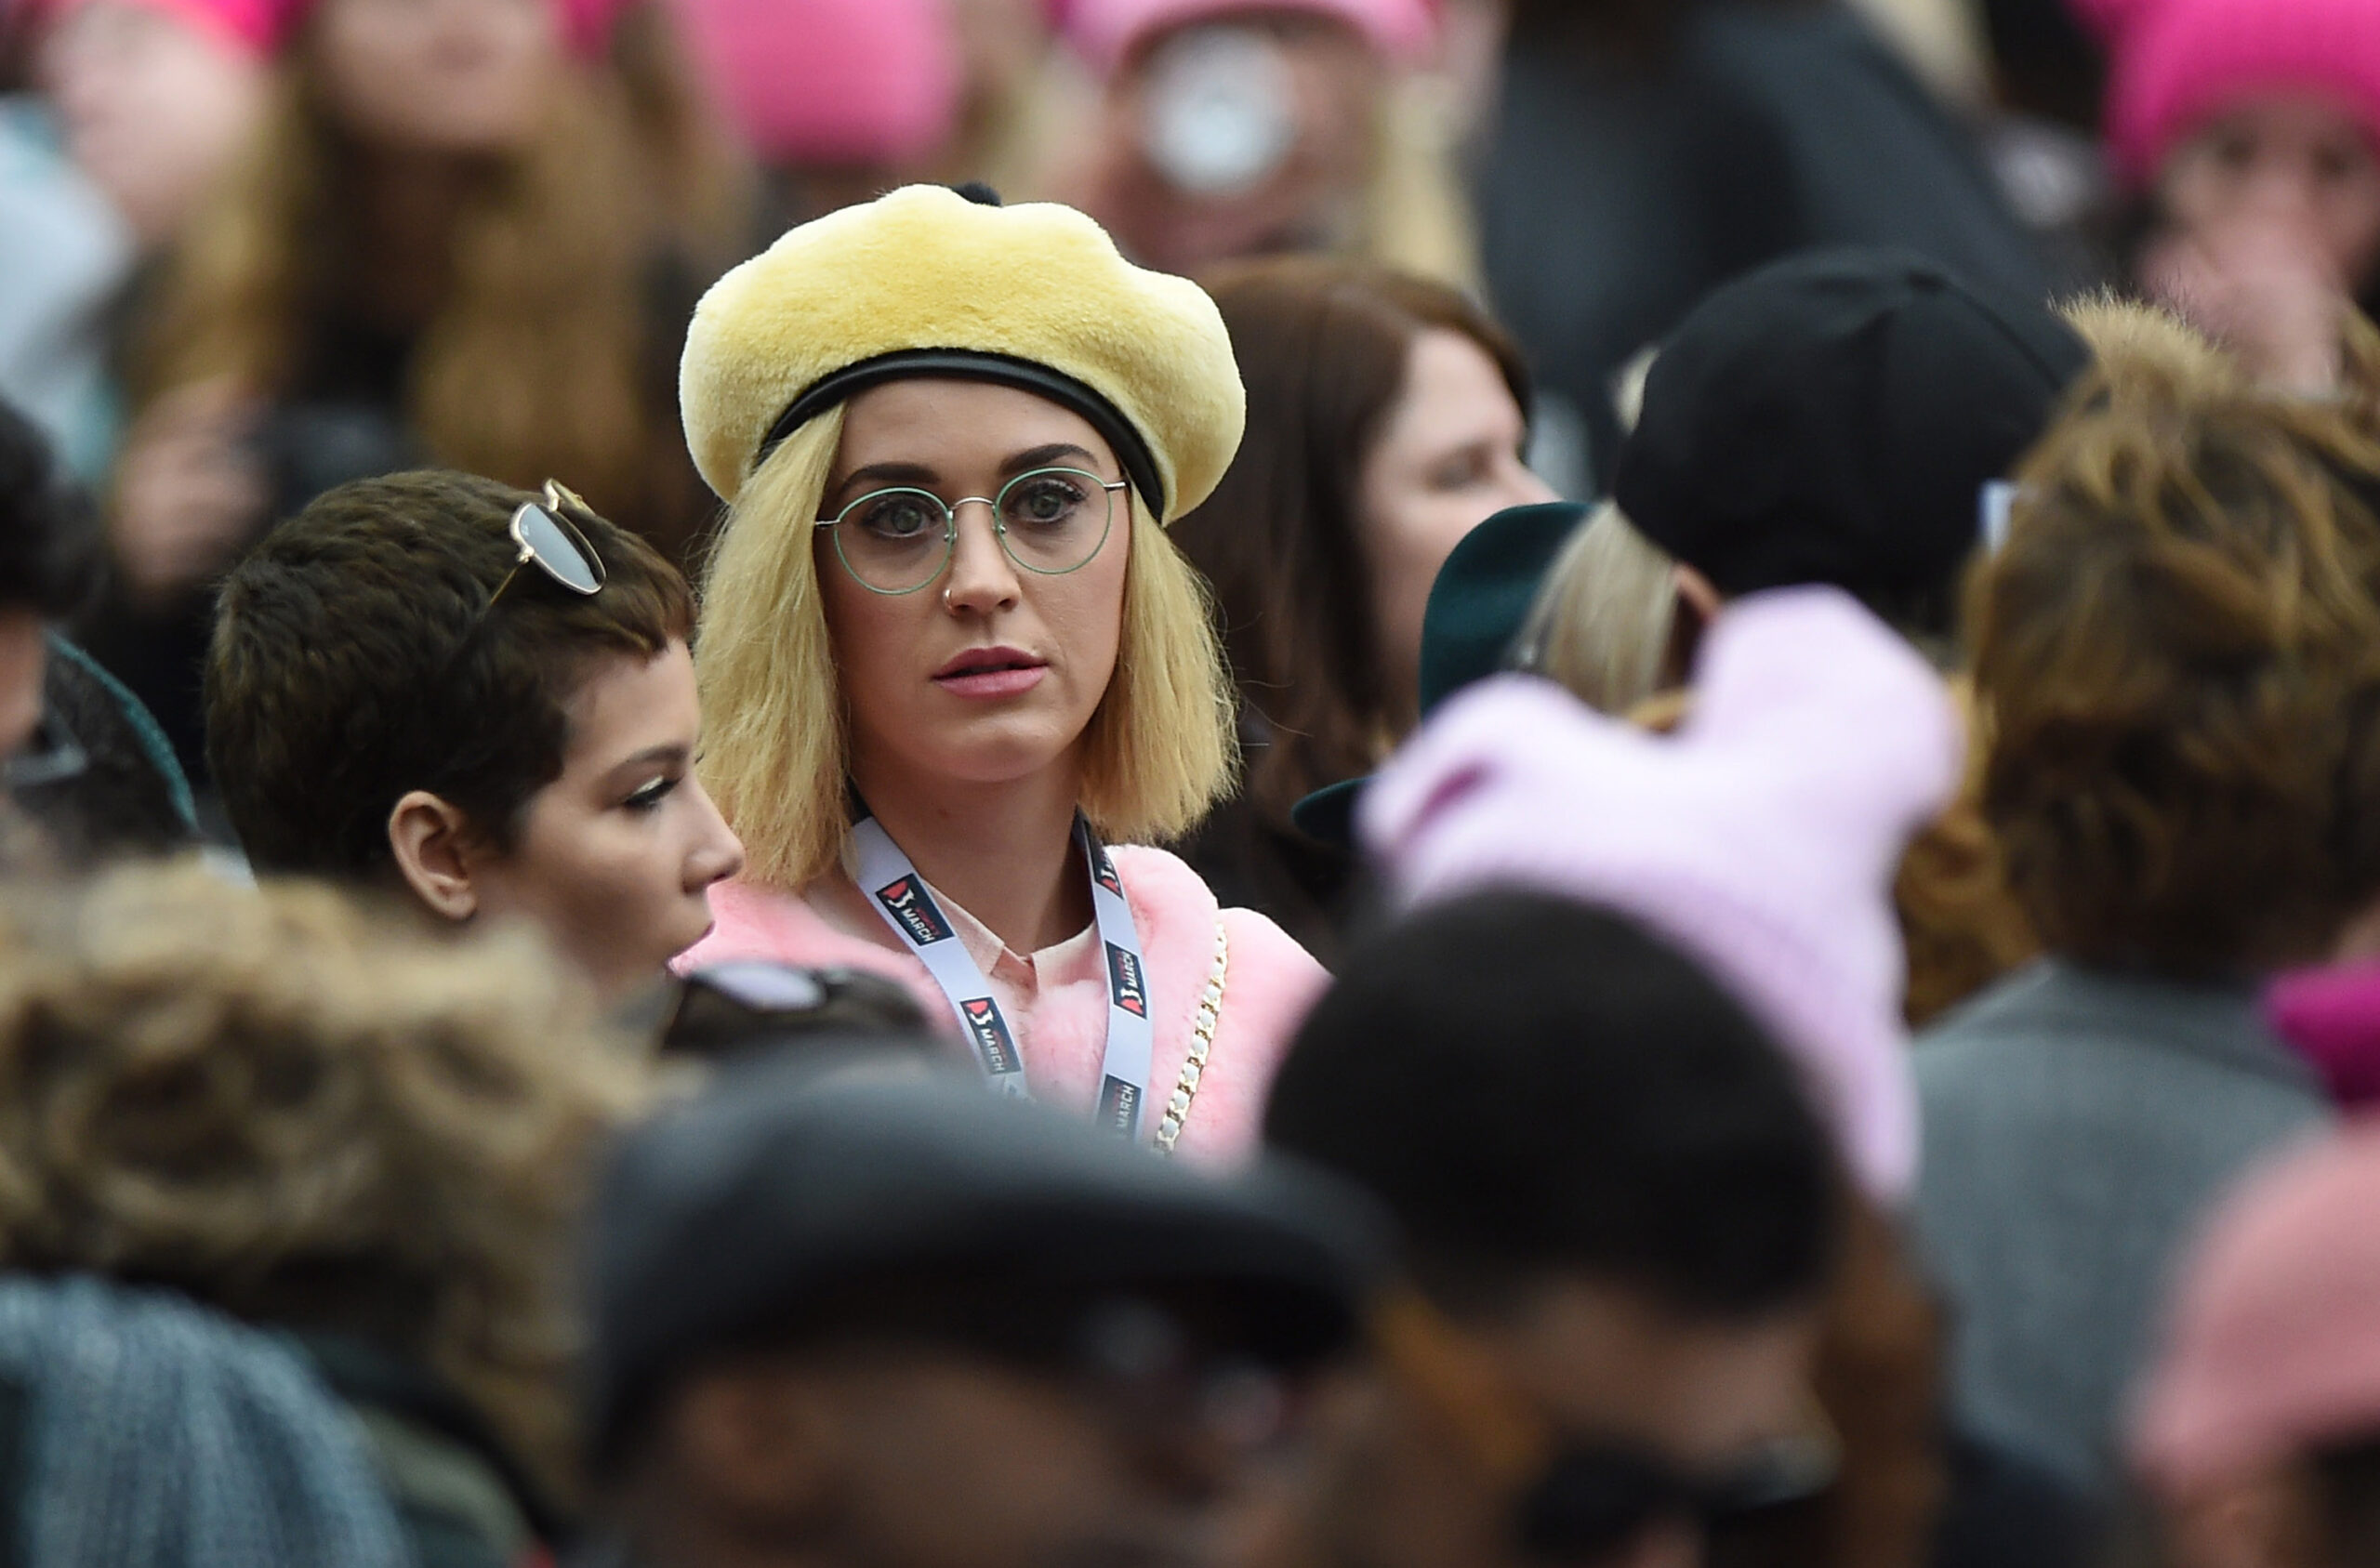 Katy Perry stands amidst a crowd of people, wearing round eyeglasses and a yellow beret.